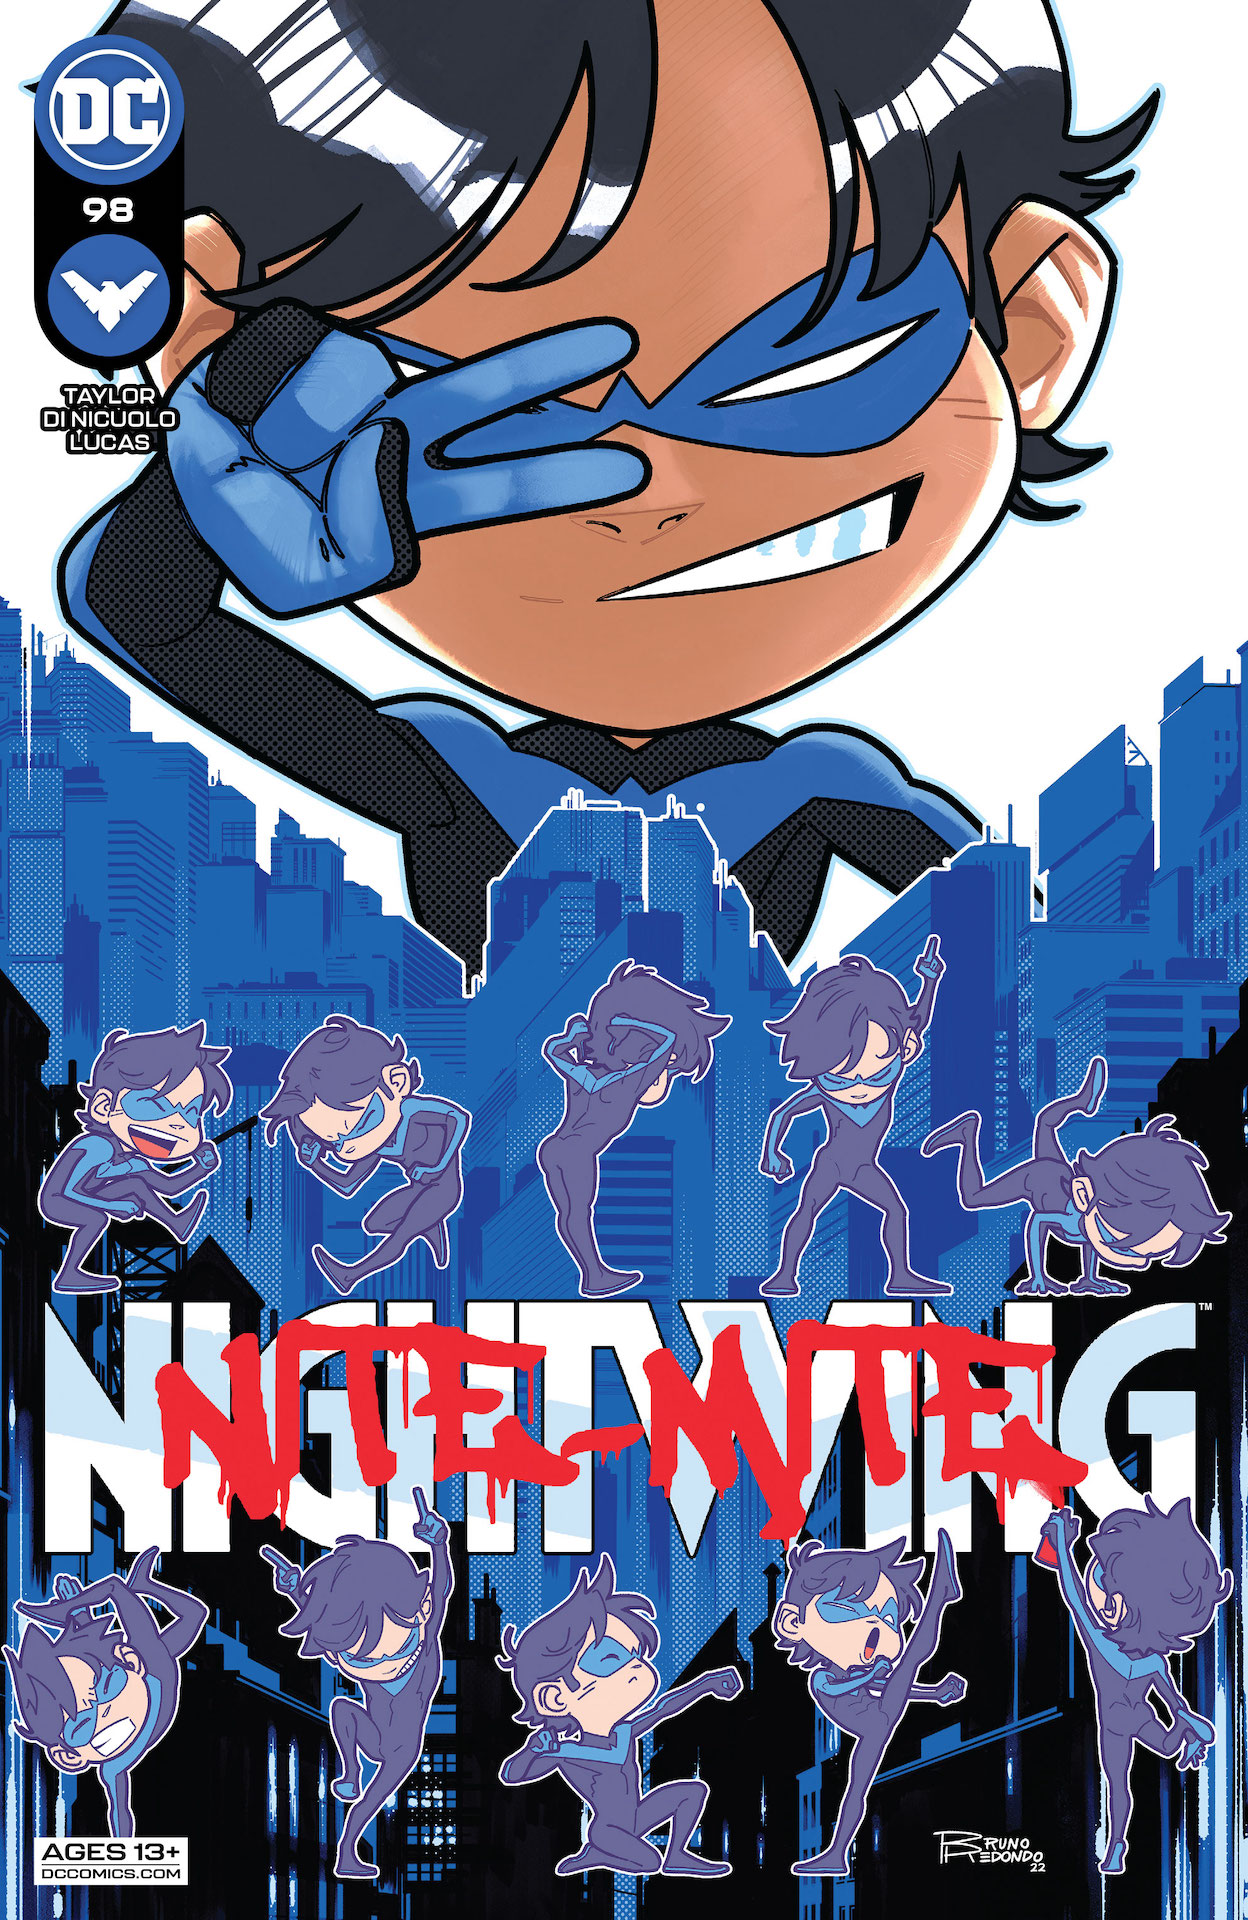 DC Preview: Nightwing #98